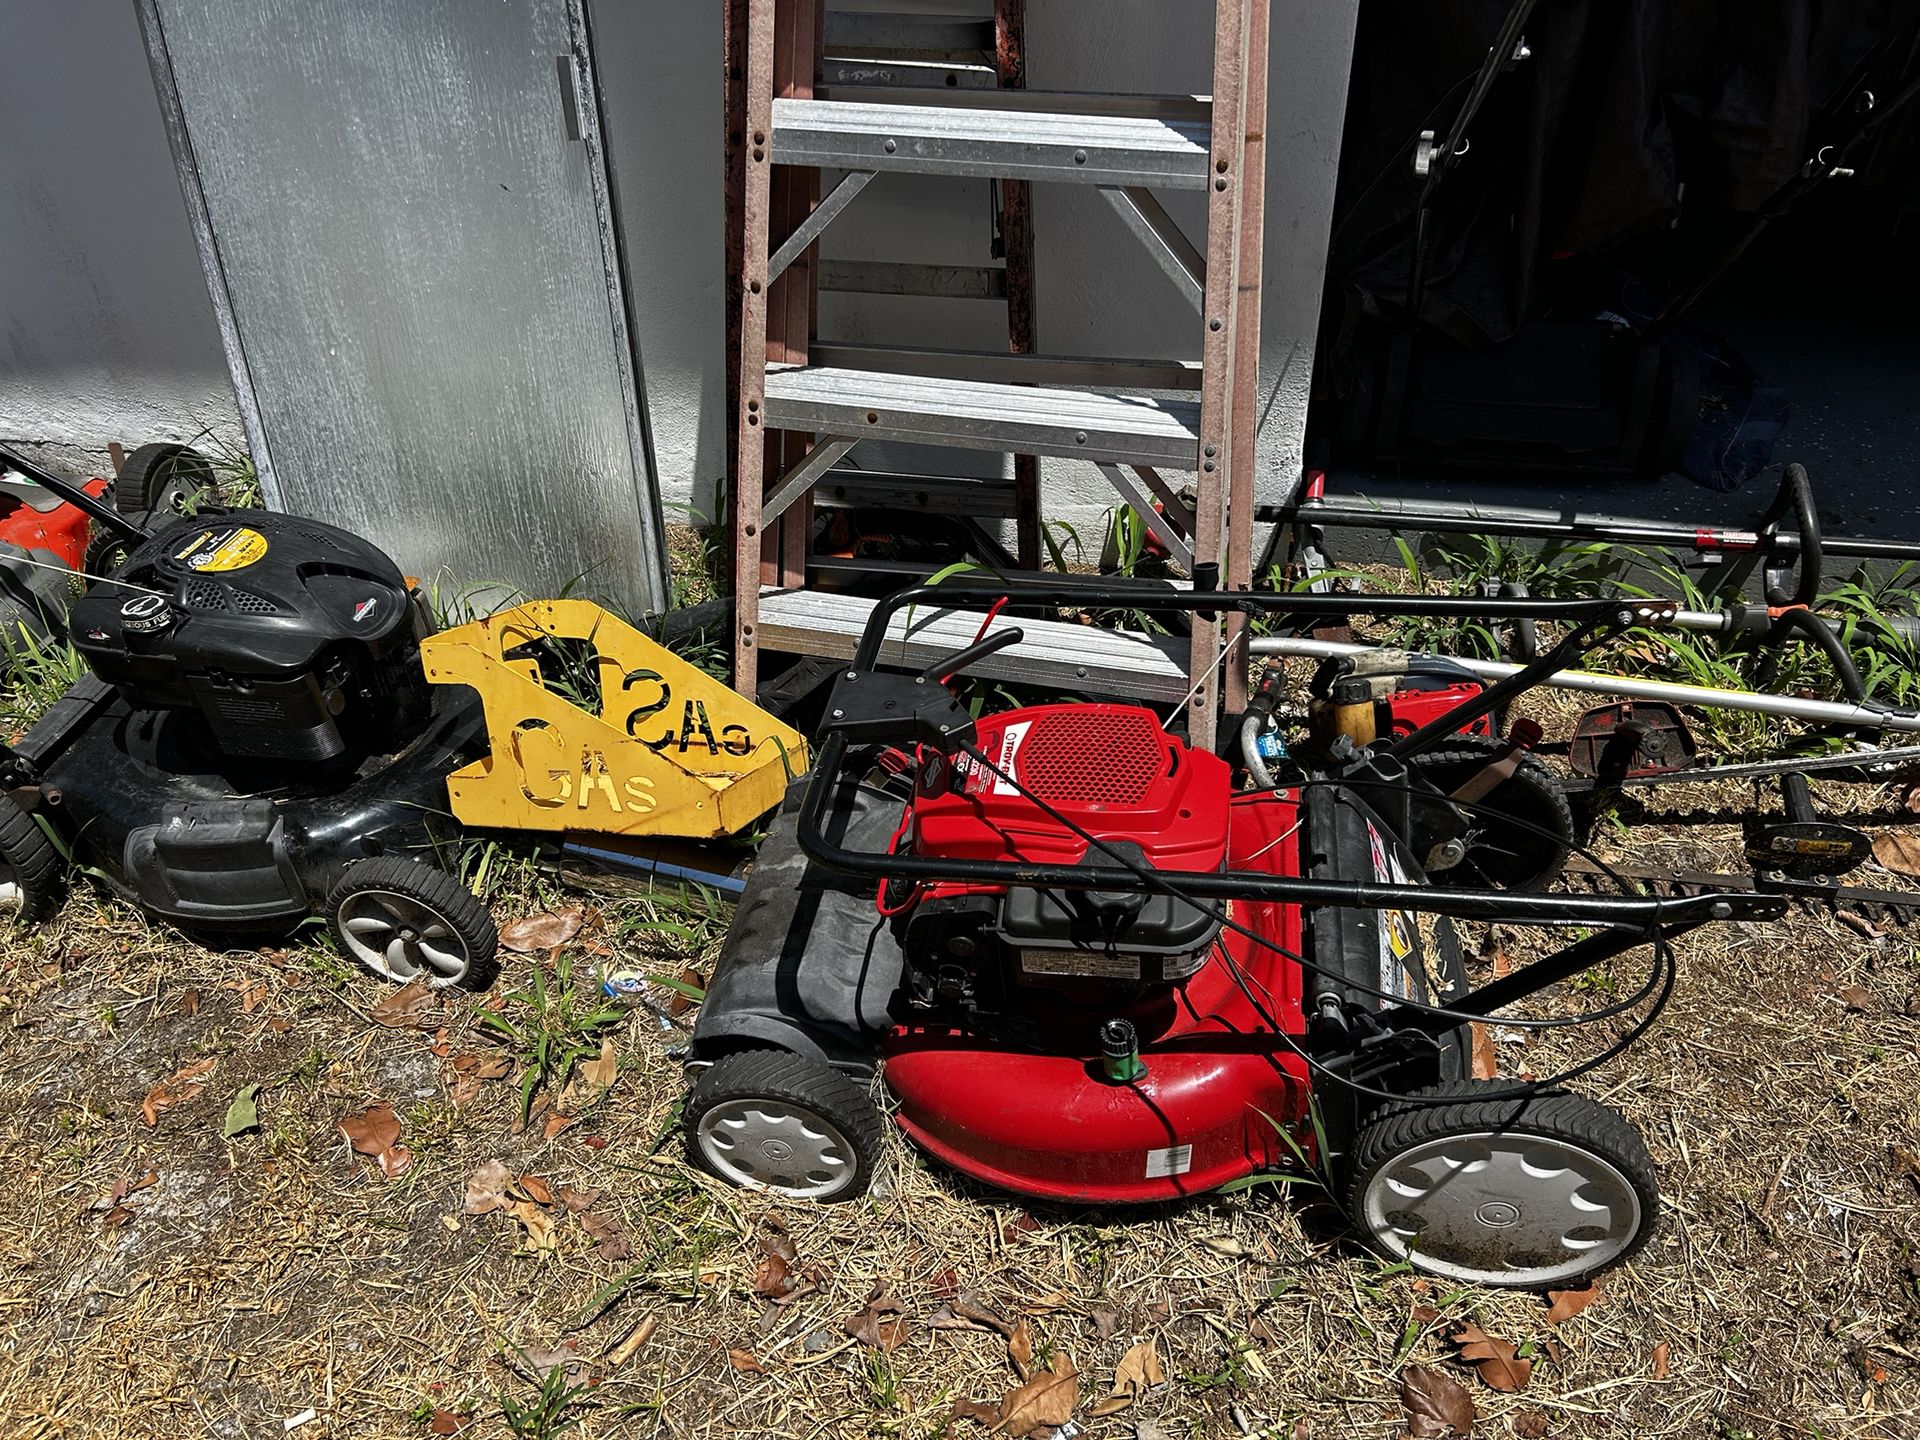 Lawn Service Equipment For Parts 